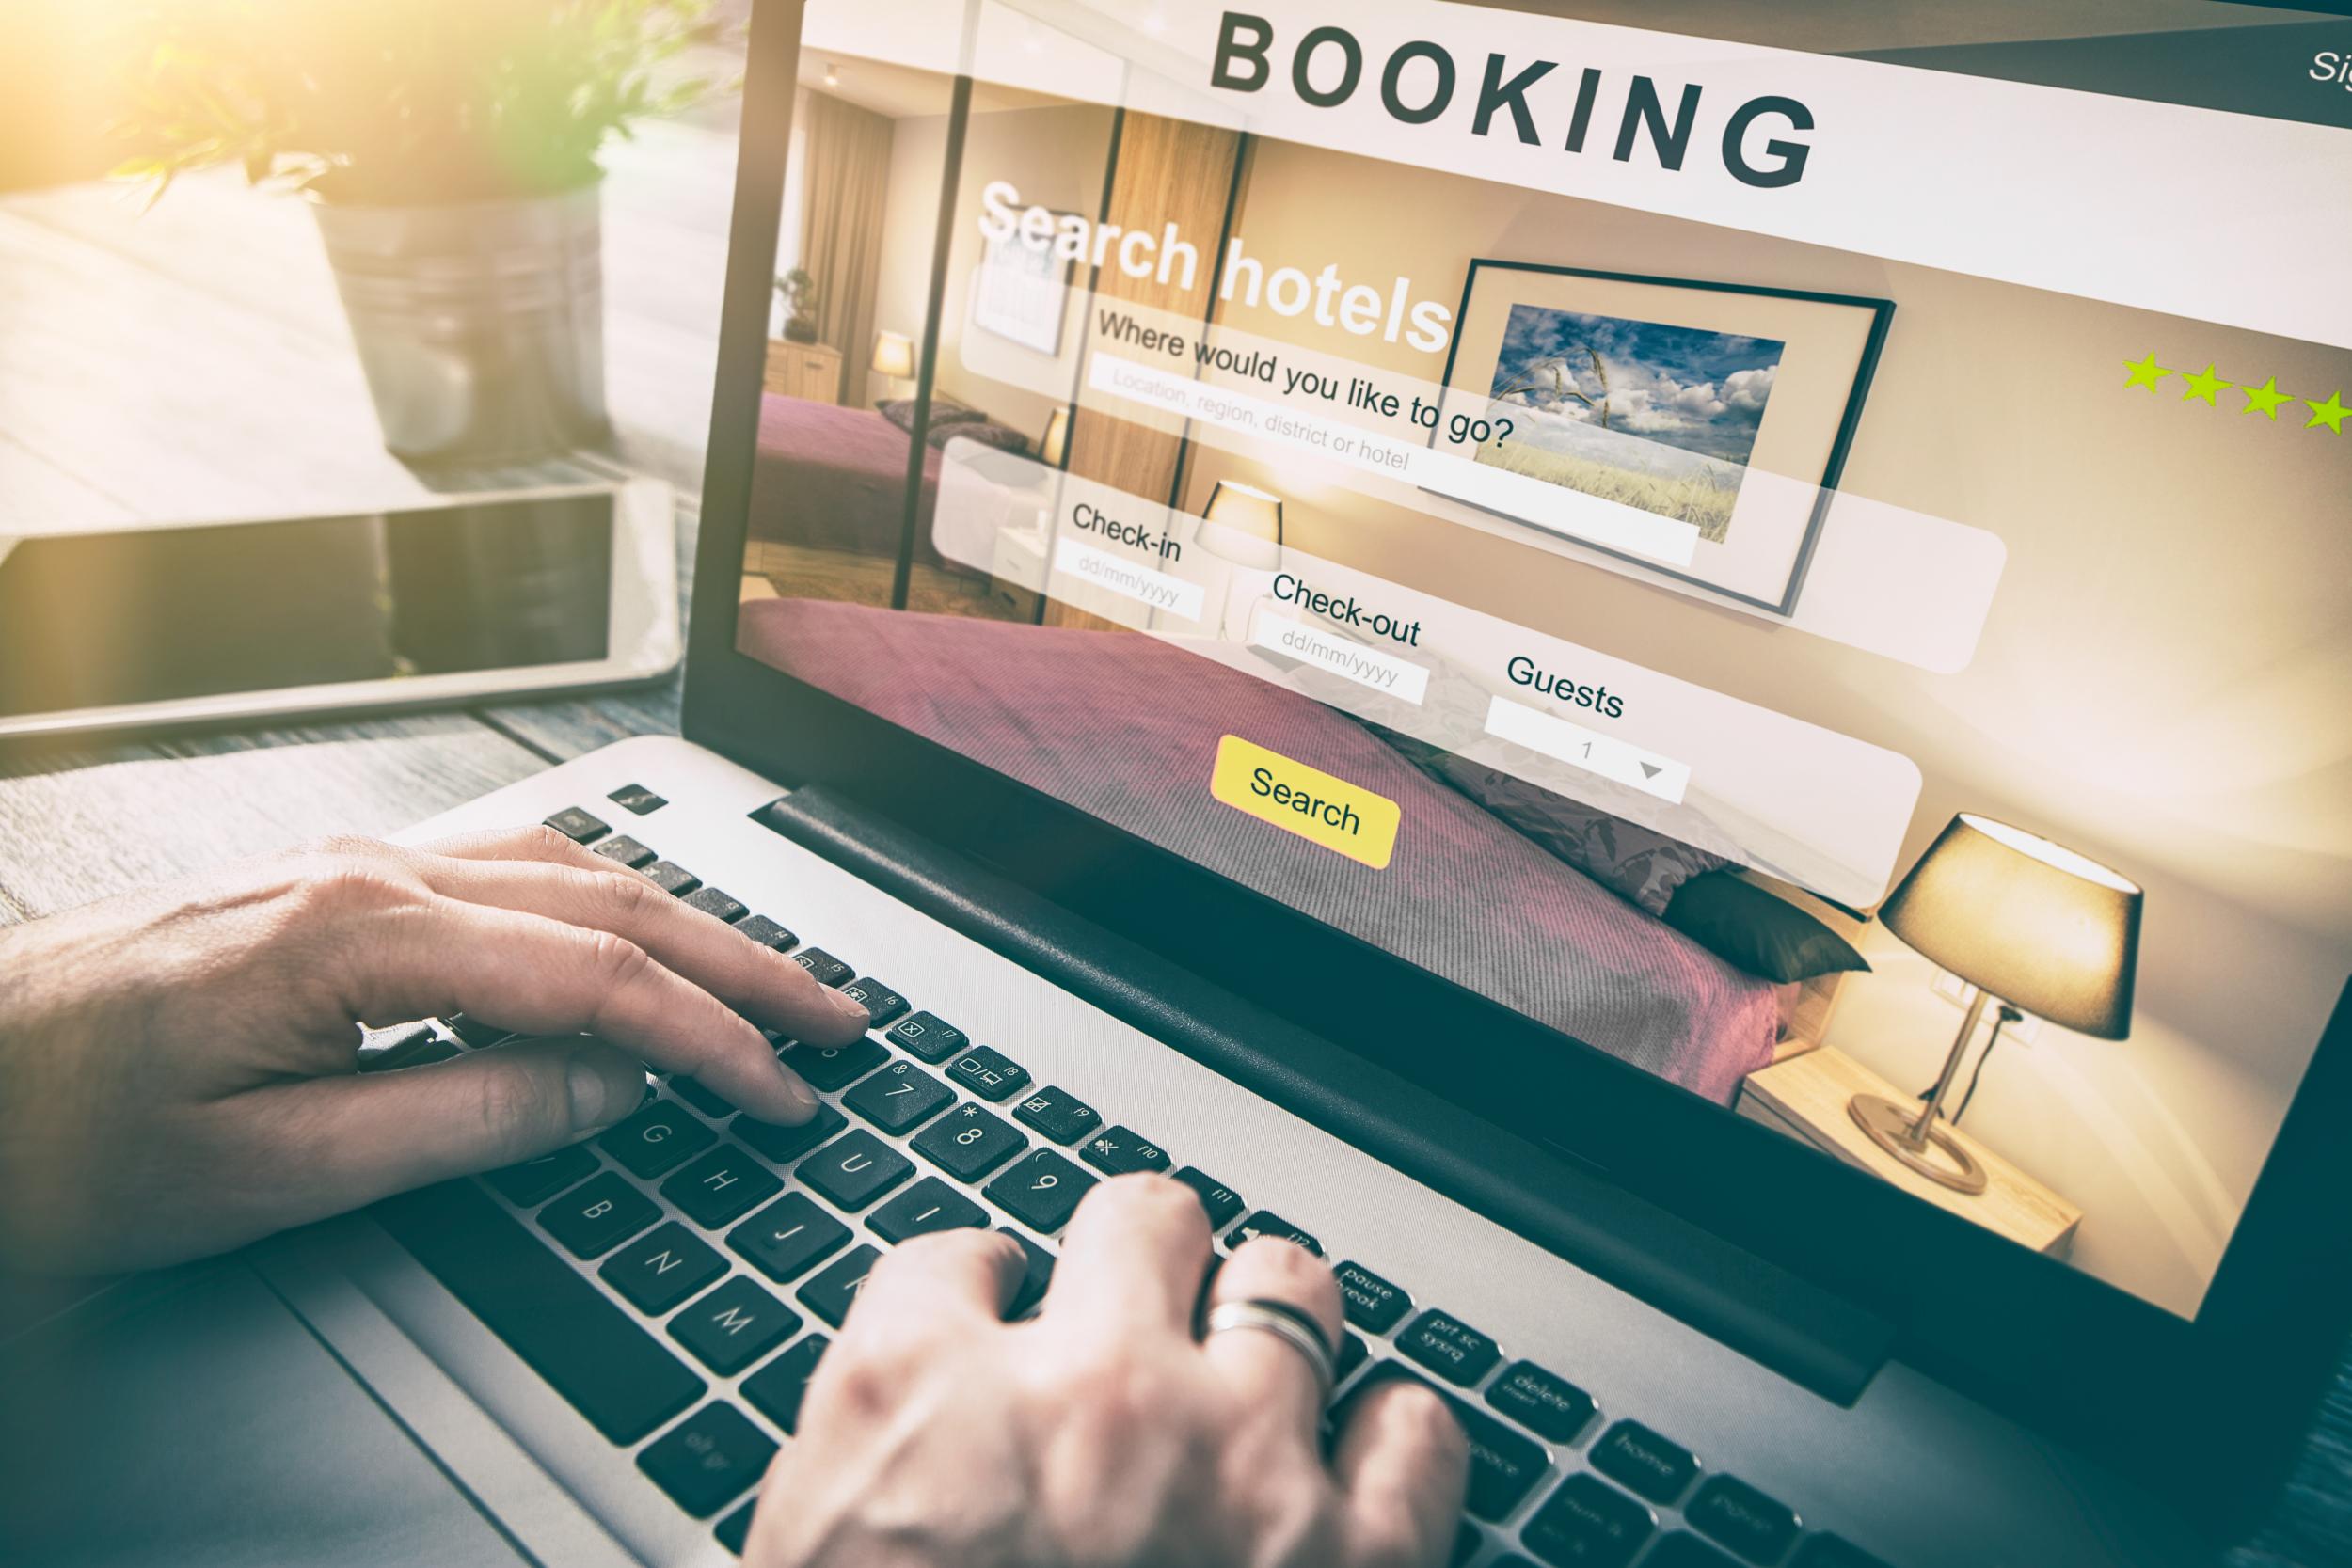 Don't fall foul of holiday scams when booking your next trip